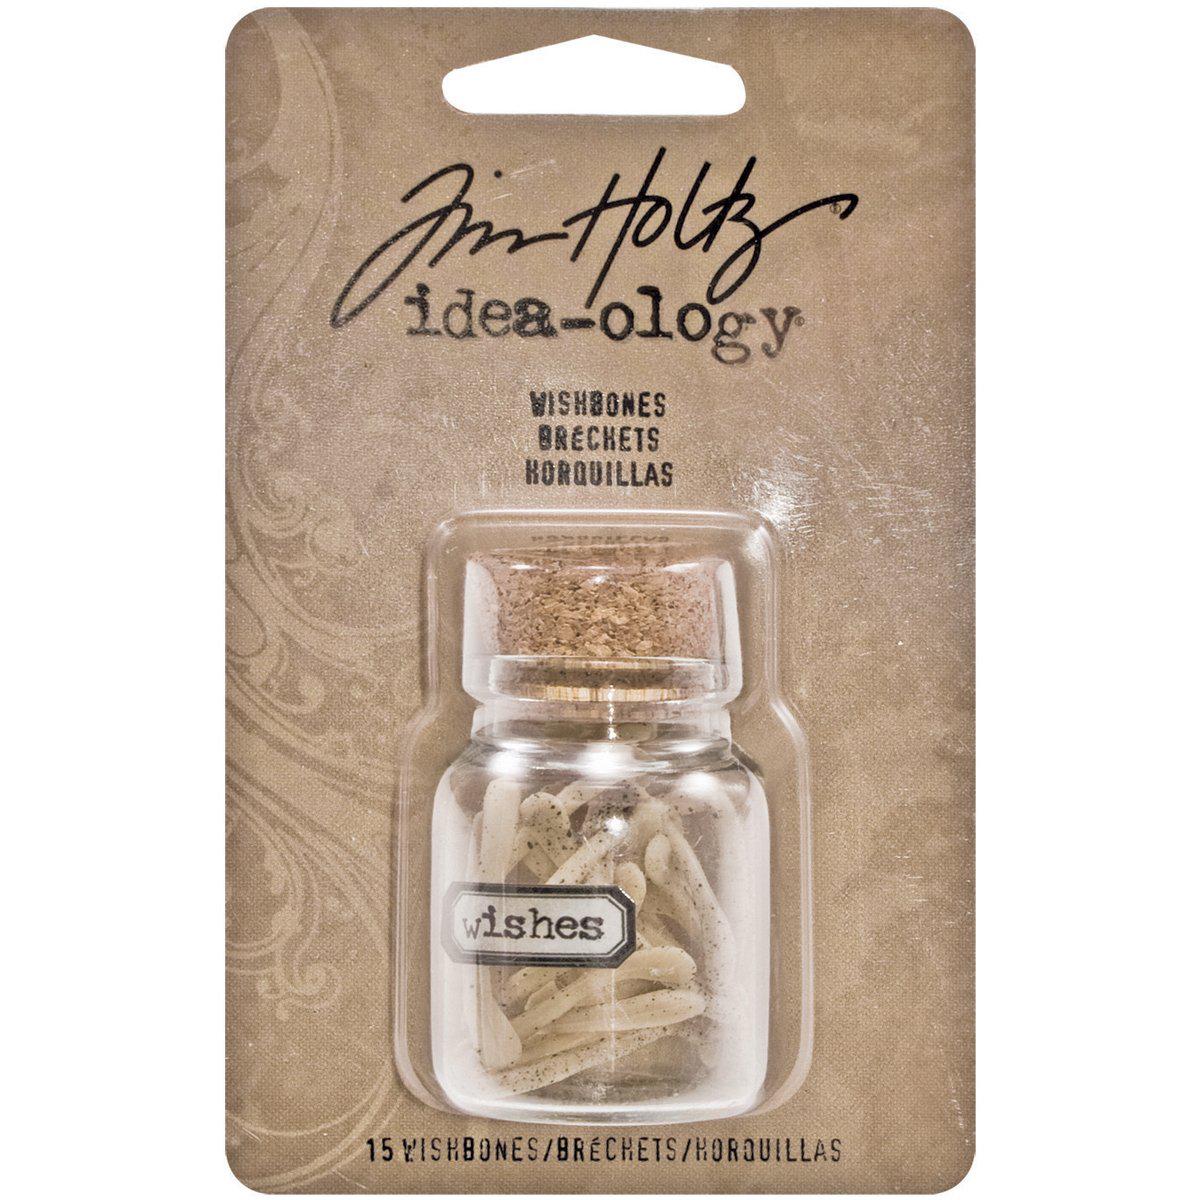 Tim Holtz Idea-ology resin wishbones by tim holtz idea-ology, 1 x 5/8 inch, 15 in corked vial, th93071